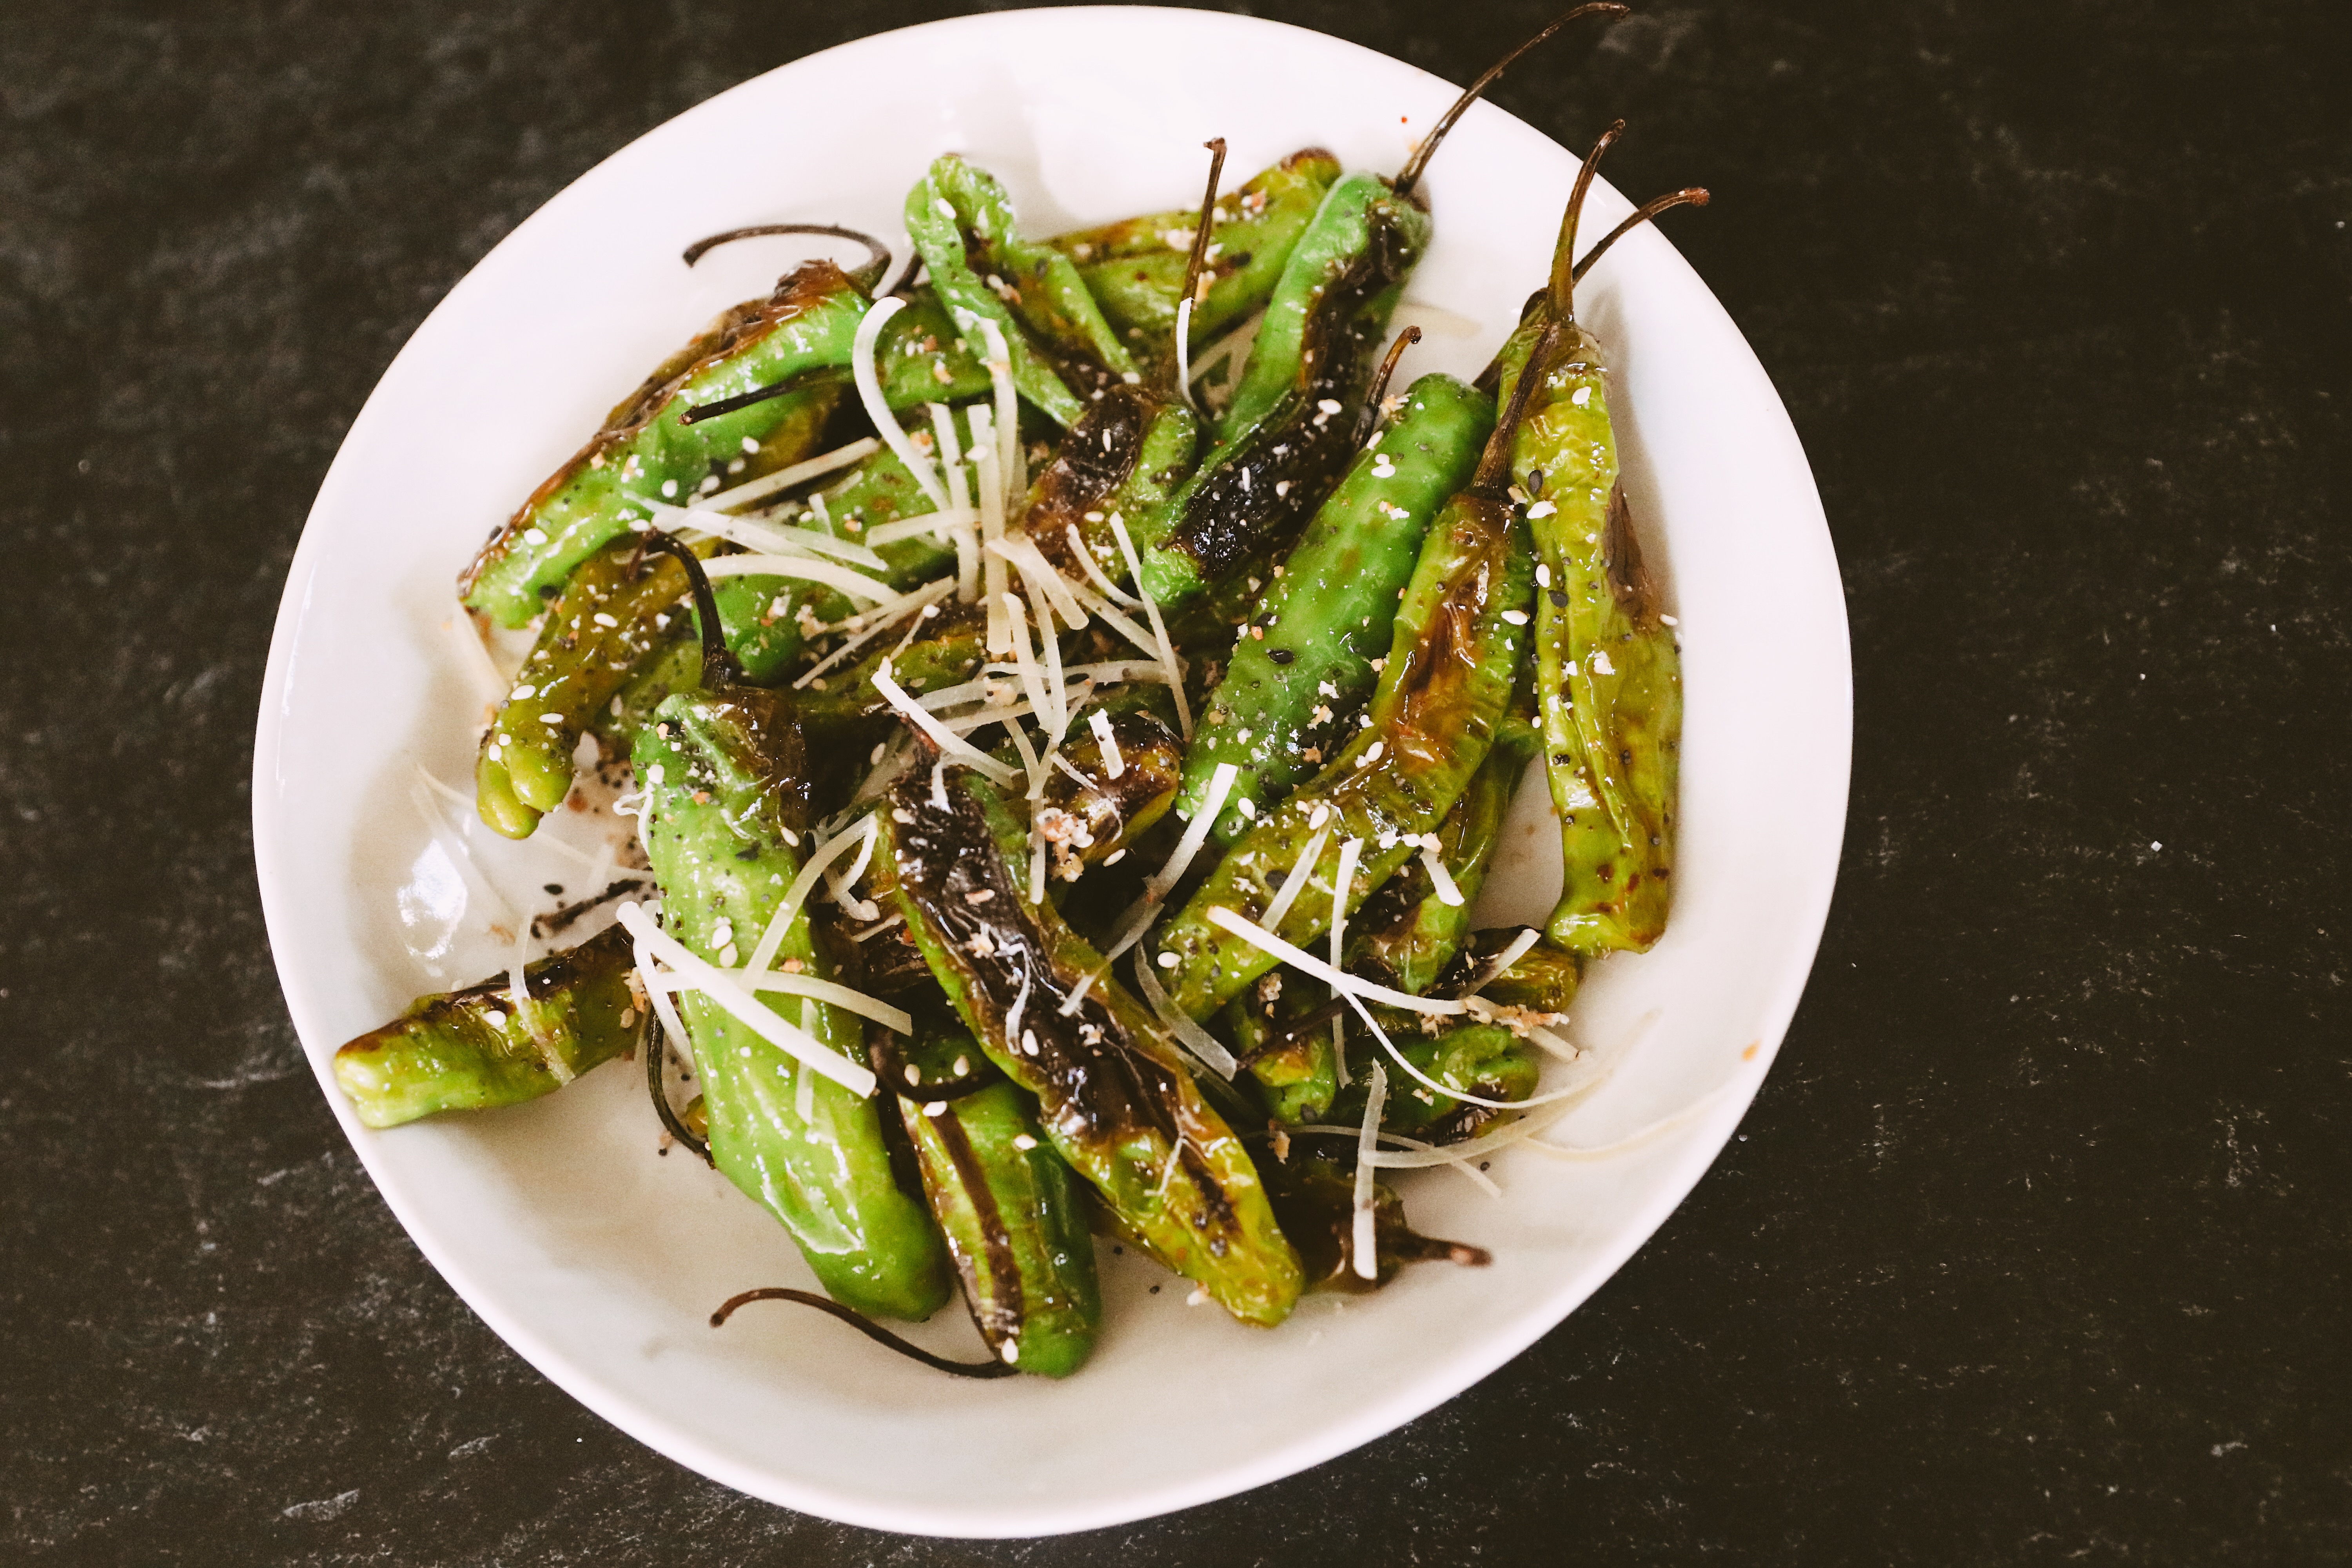 Top Nashville Lifestyle blogger, Nashville Wifestyles shares her Easy Shishito Peppers Recipe. Click here to see more now!